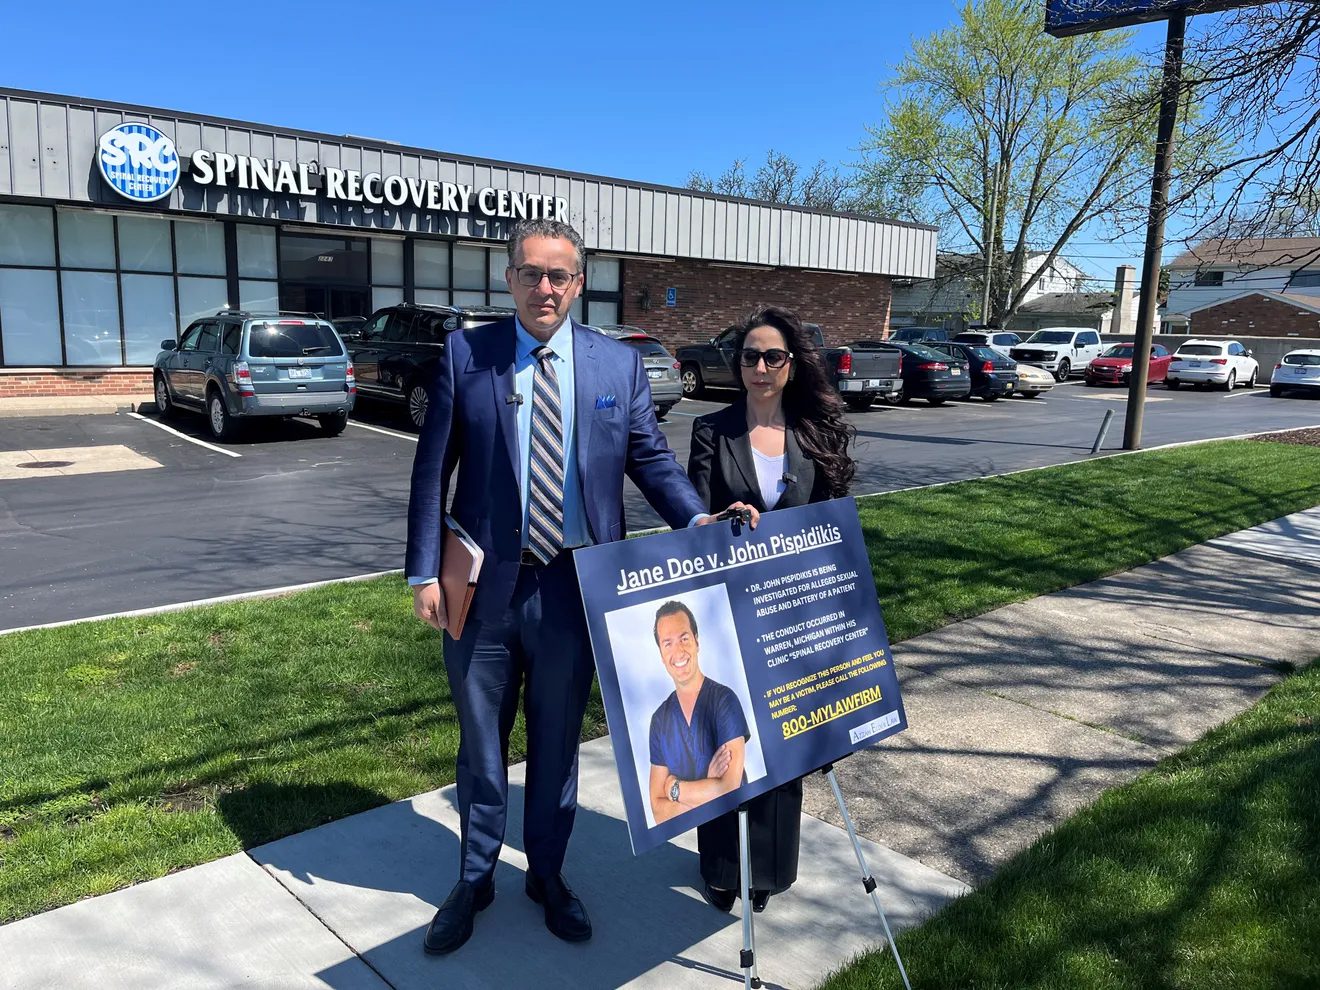 Attorneys Azzam Elder and Nina Korkis-Taweel standing in front of Pispidikis Spinal Recovery Center after holding the press conference on Friday, April 19. – Videograb